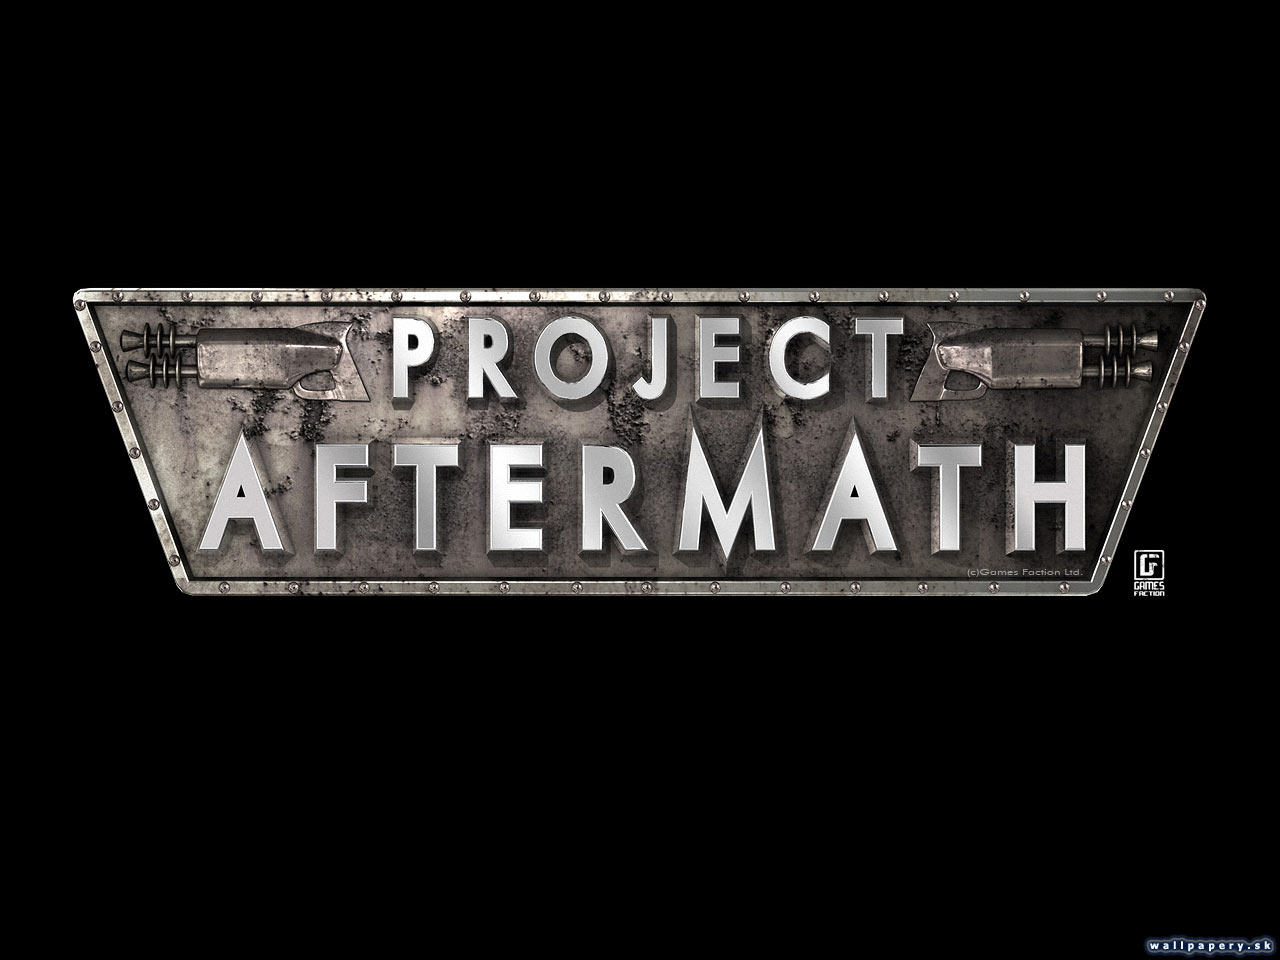 Project Aftermath - wallpaper 2